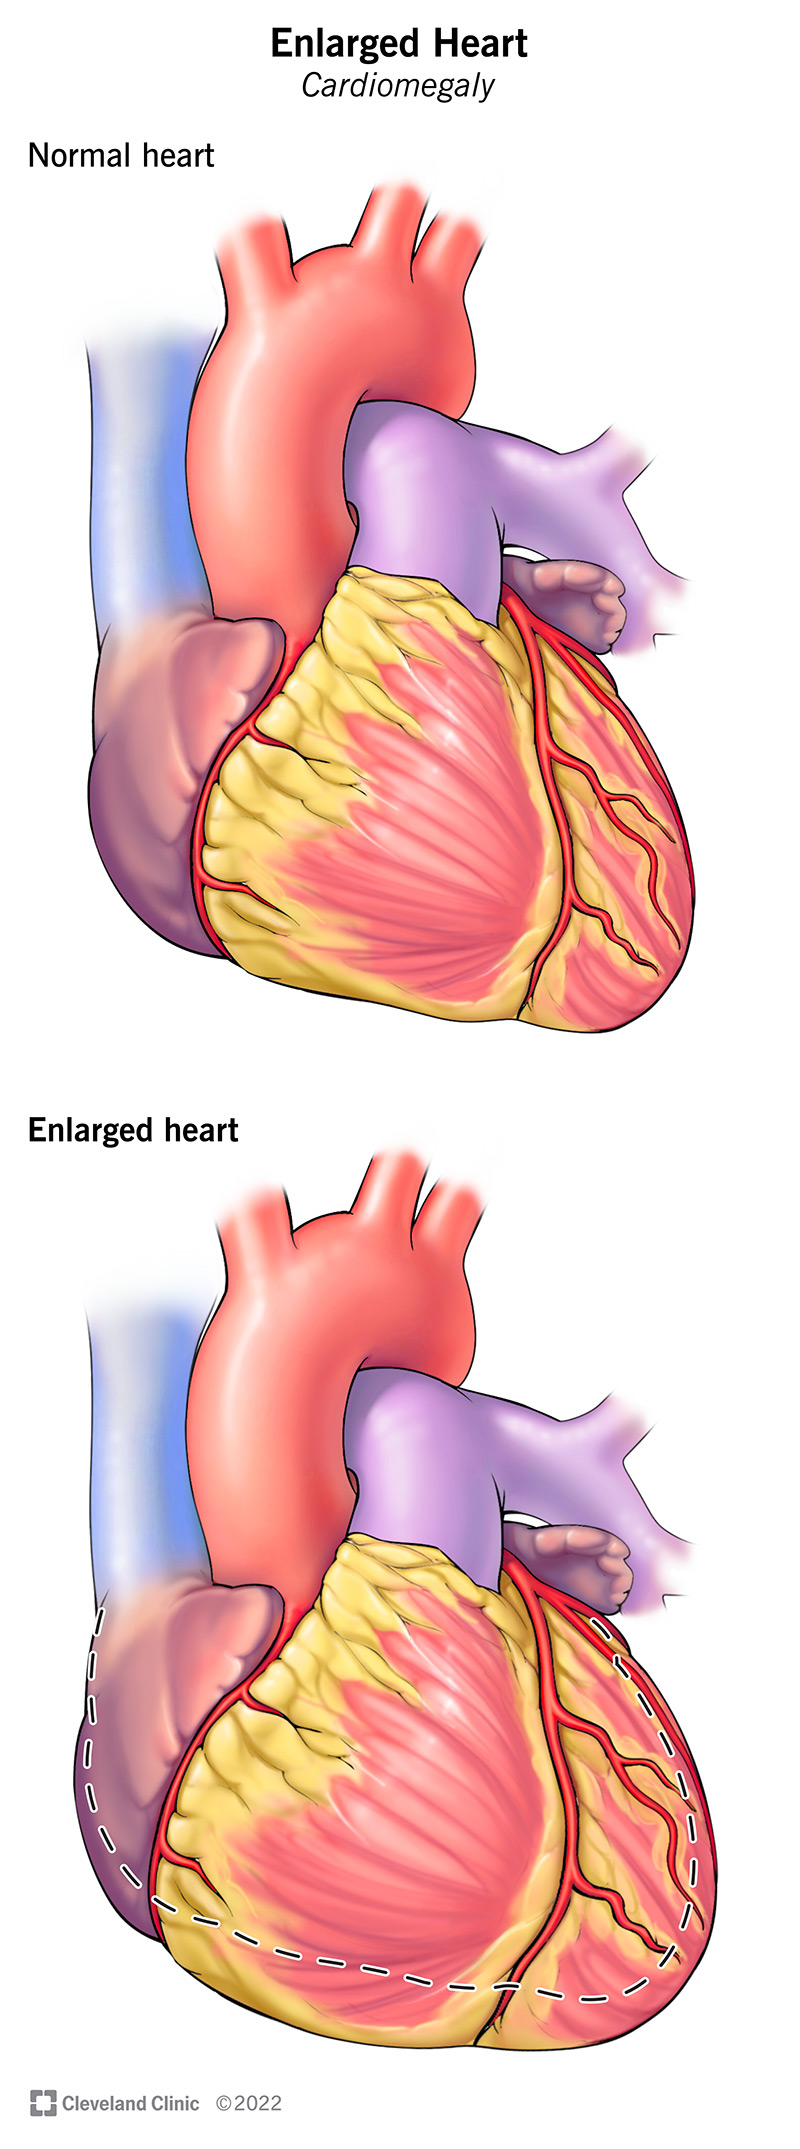 Comparing a normal heart to one with cardiomegaly.